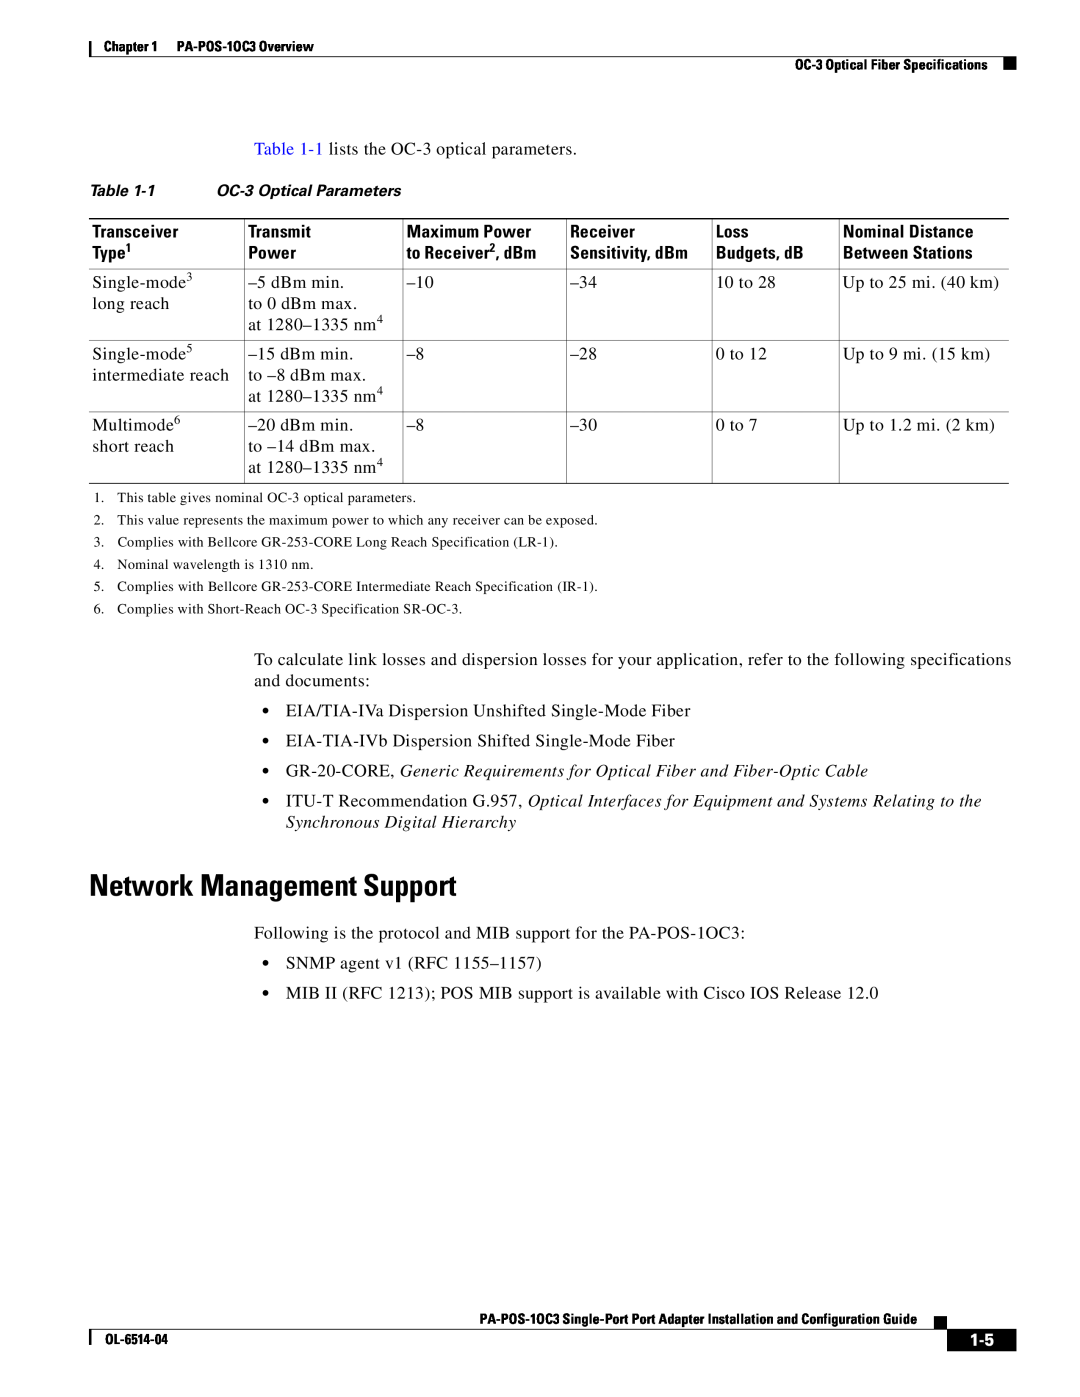 Cisco Systems PA-POS-1OC3 manual Network Management Support, Transceiver, Transmit, Maximum Power, Receiver, Loss, Type1 